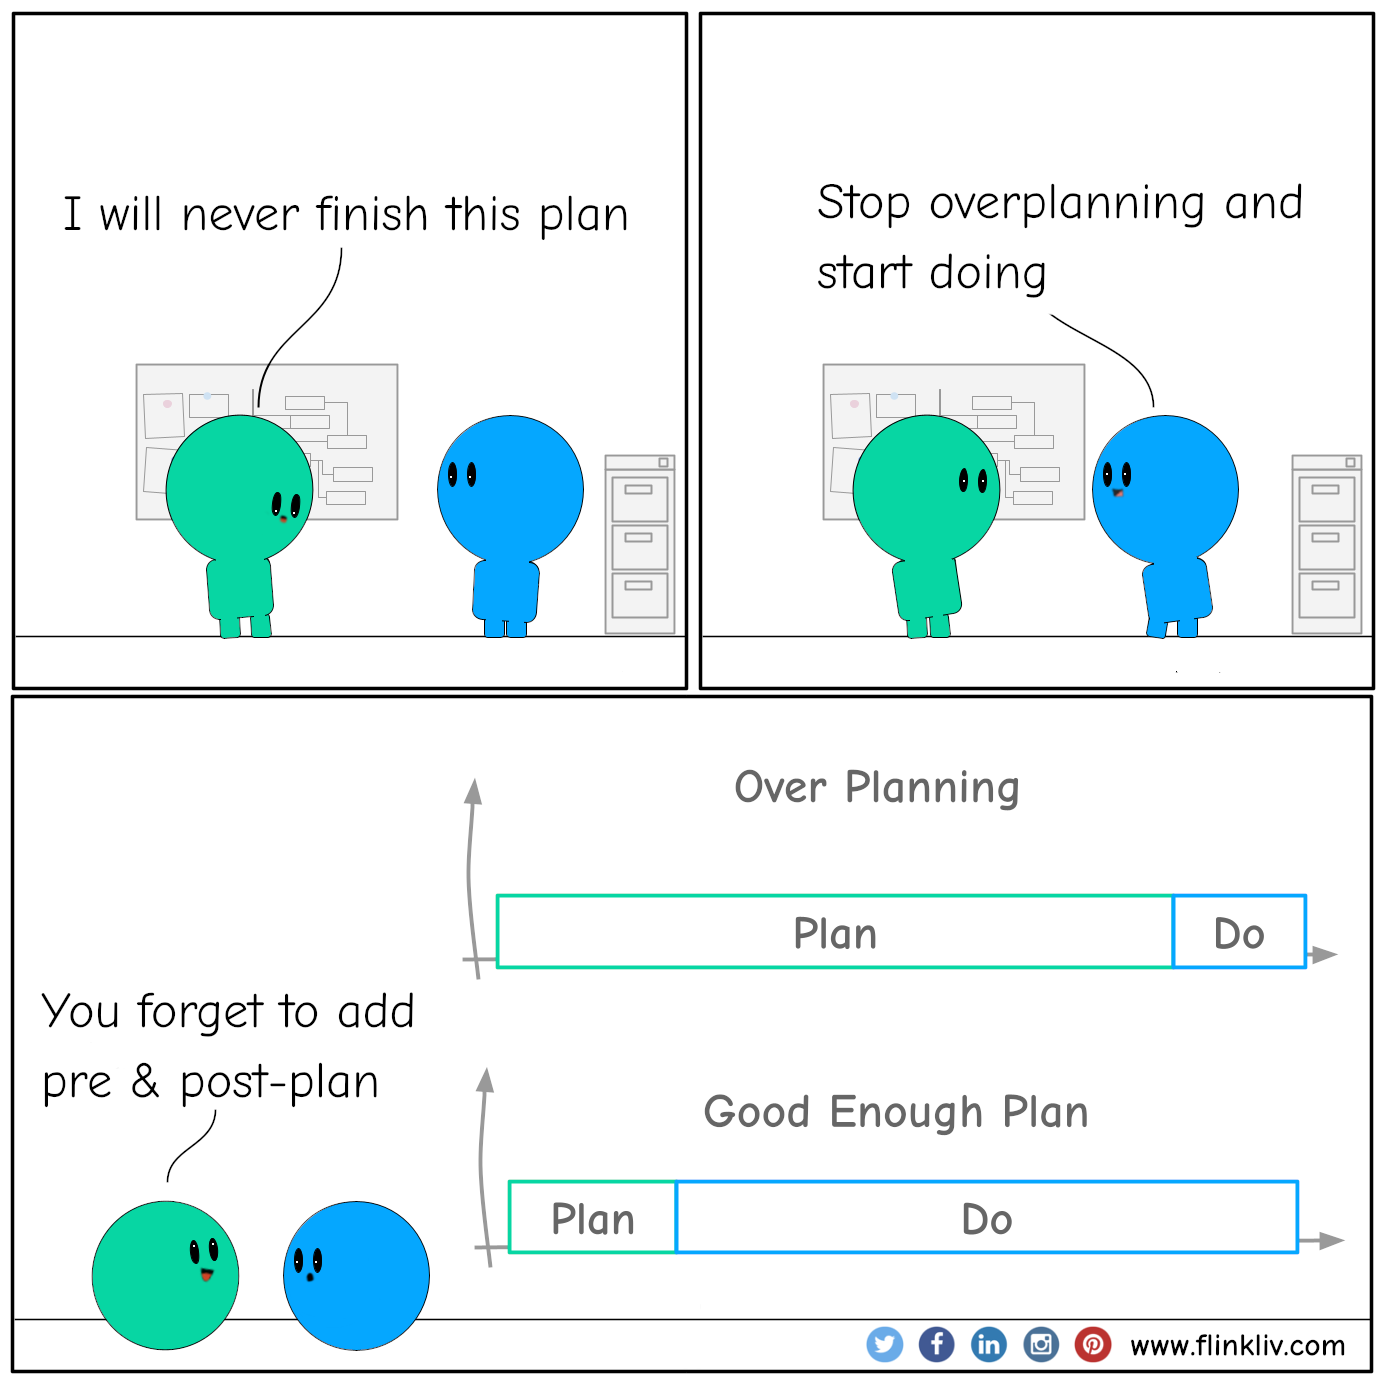 Conversation between A and B about overplanning
				A: I will never finish this plan.
				B: Stop overplanning and start doing.
				A: You forget to add pre & post-plan.

				